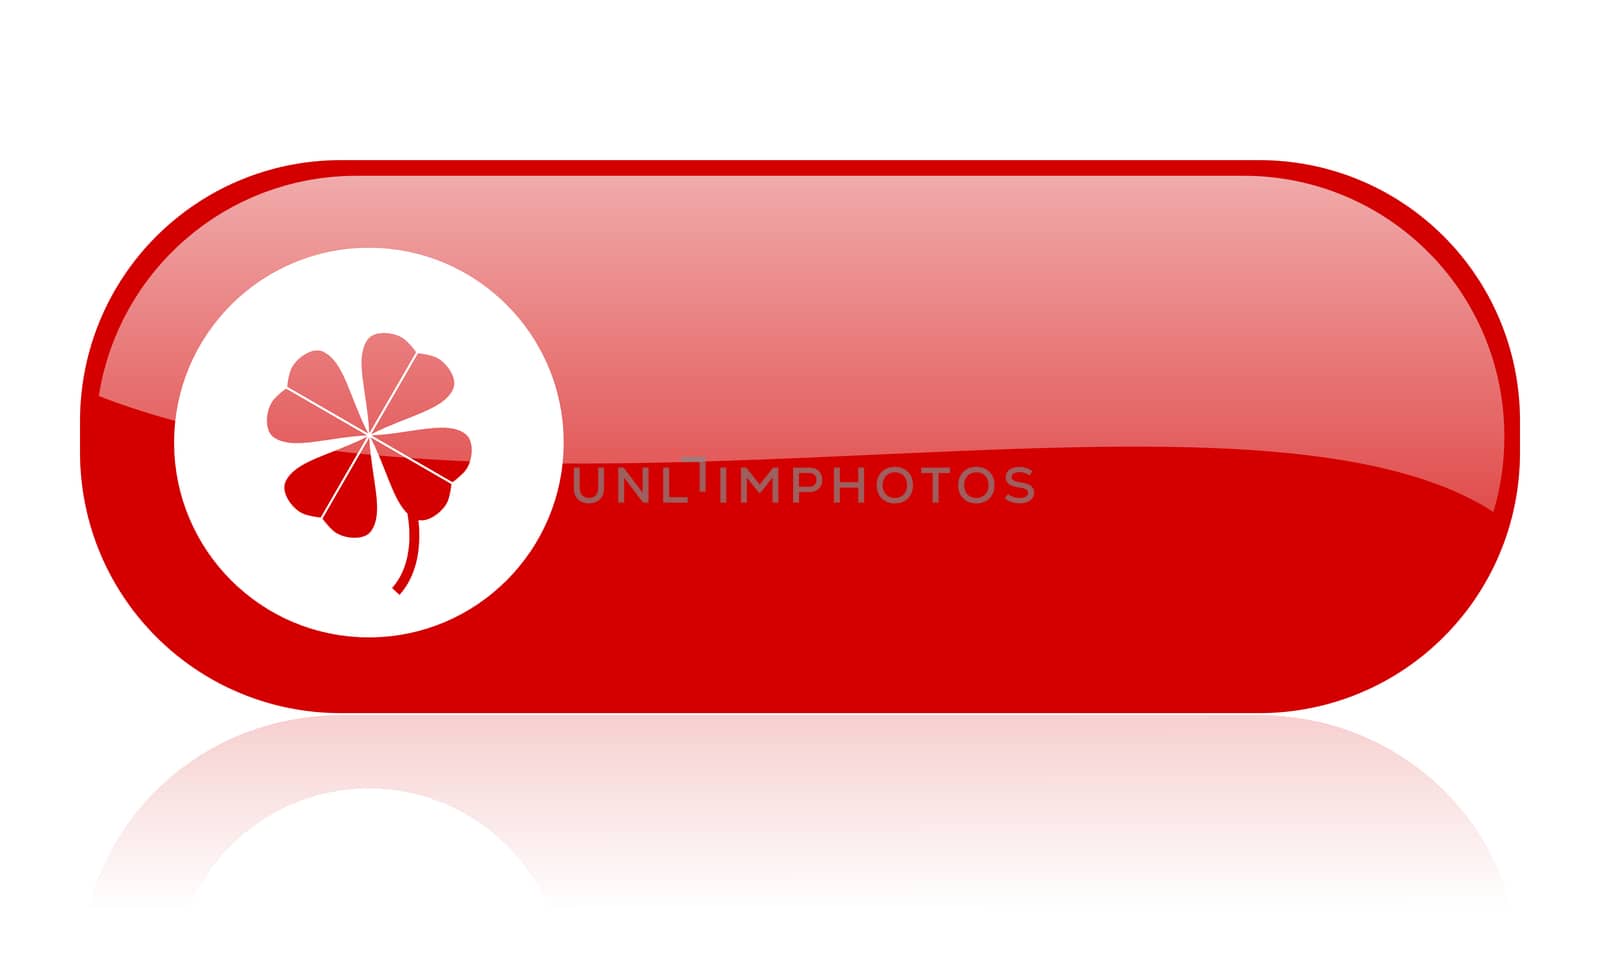 four-leaf clover red web glossy icon